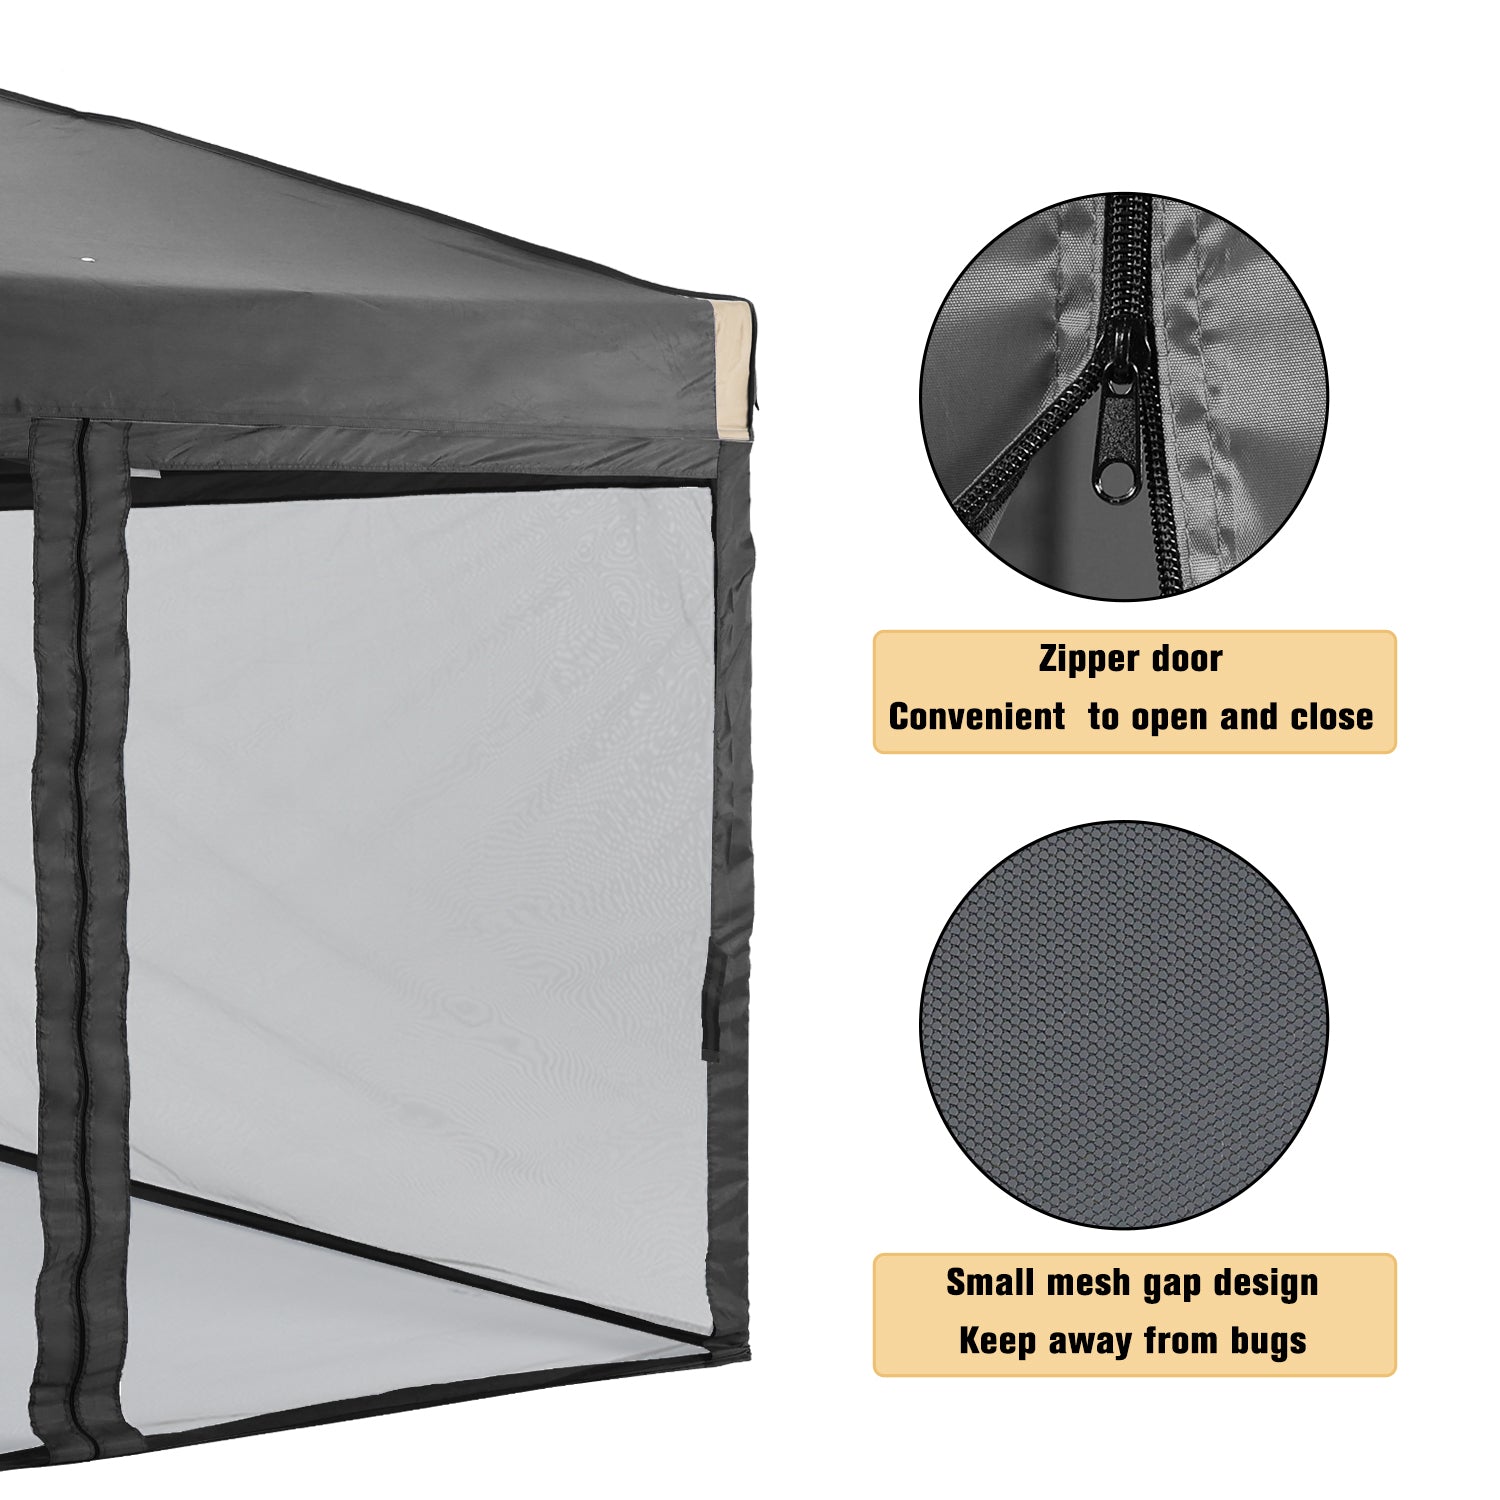 Canopy Mesh Sidewall Replacement with 2 Side Zipper for 10'' x 10'' Pop Up Canopy Tent  (Net Only) Gazebo part Aoodor LLC   